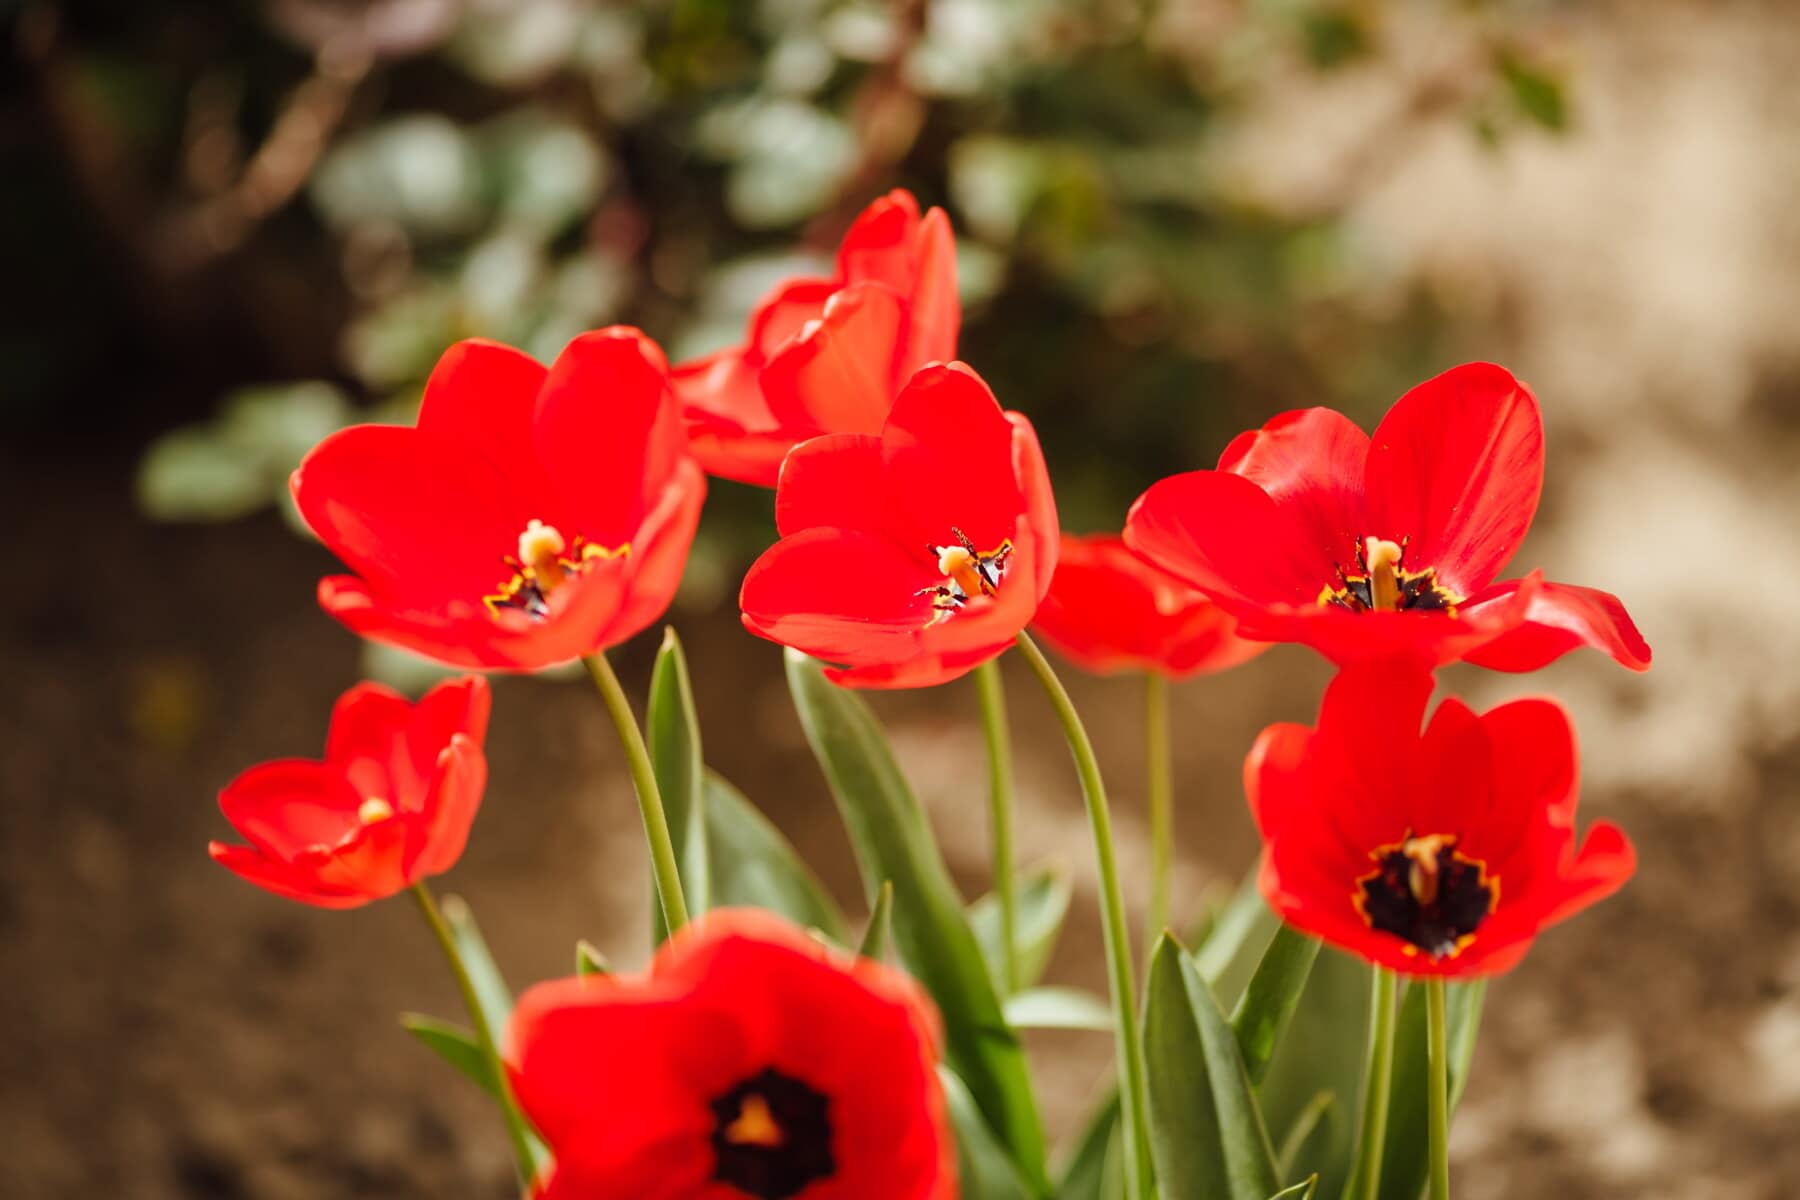 red, tulips, spring time, horticulture, sunny, tulip, flora, leaf, nature, flower